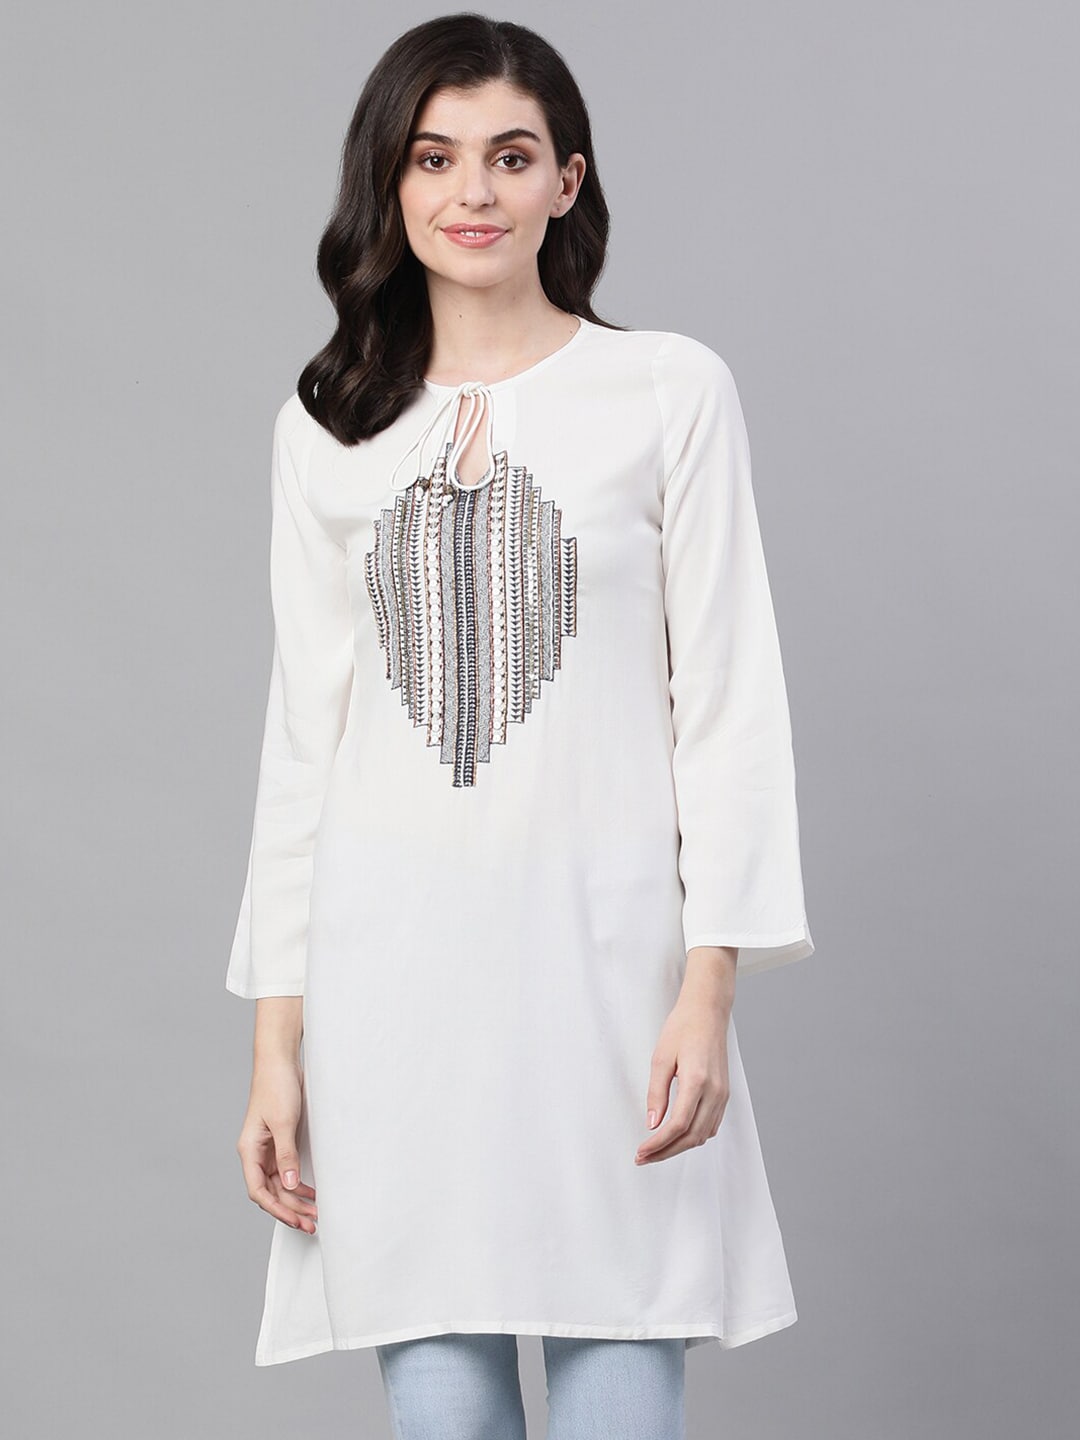 Ishin Off Embroidered Beads And Stones Tie-Up Neck Kurti Price in India